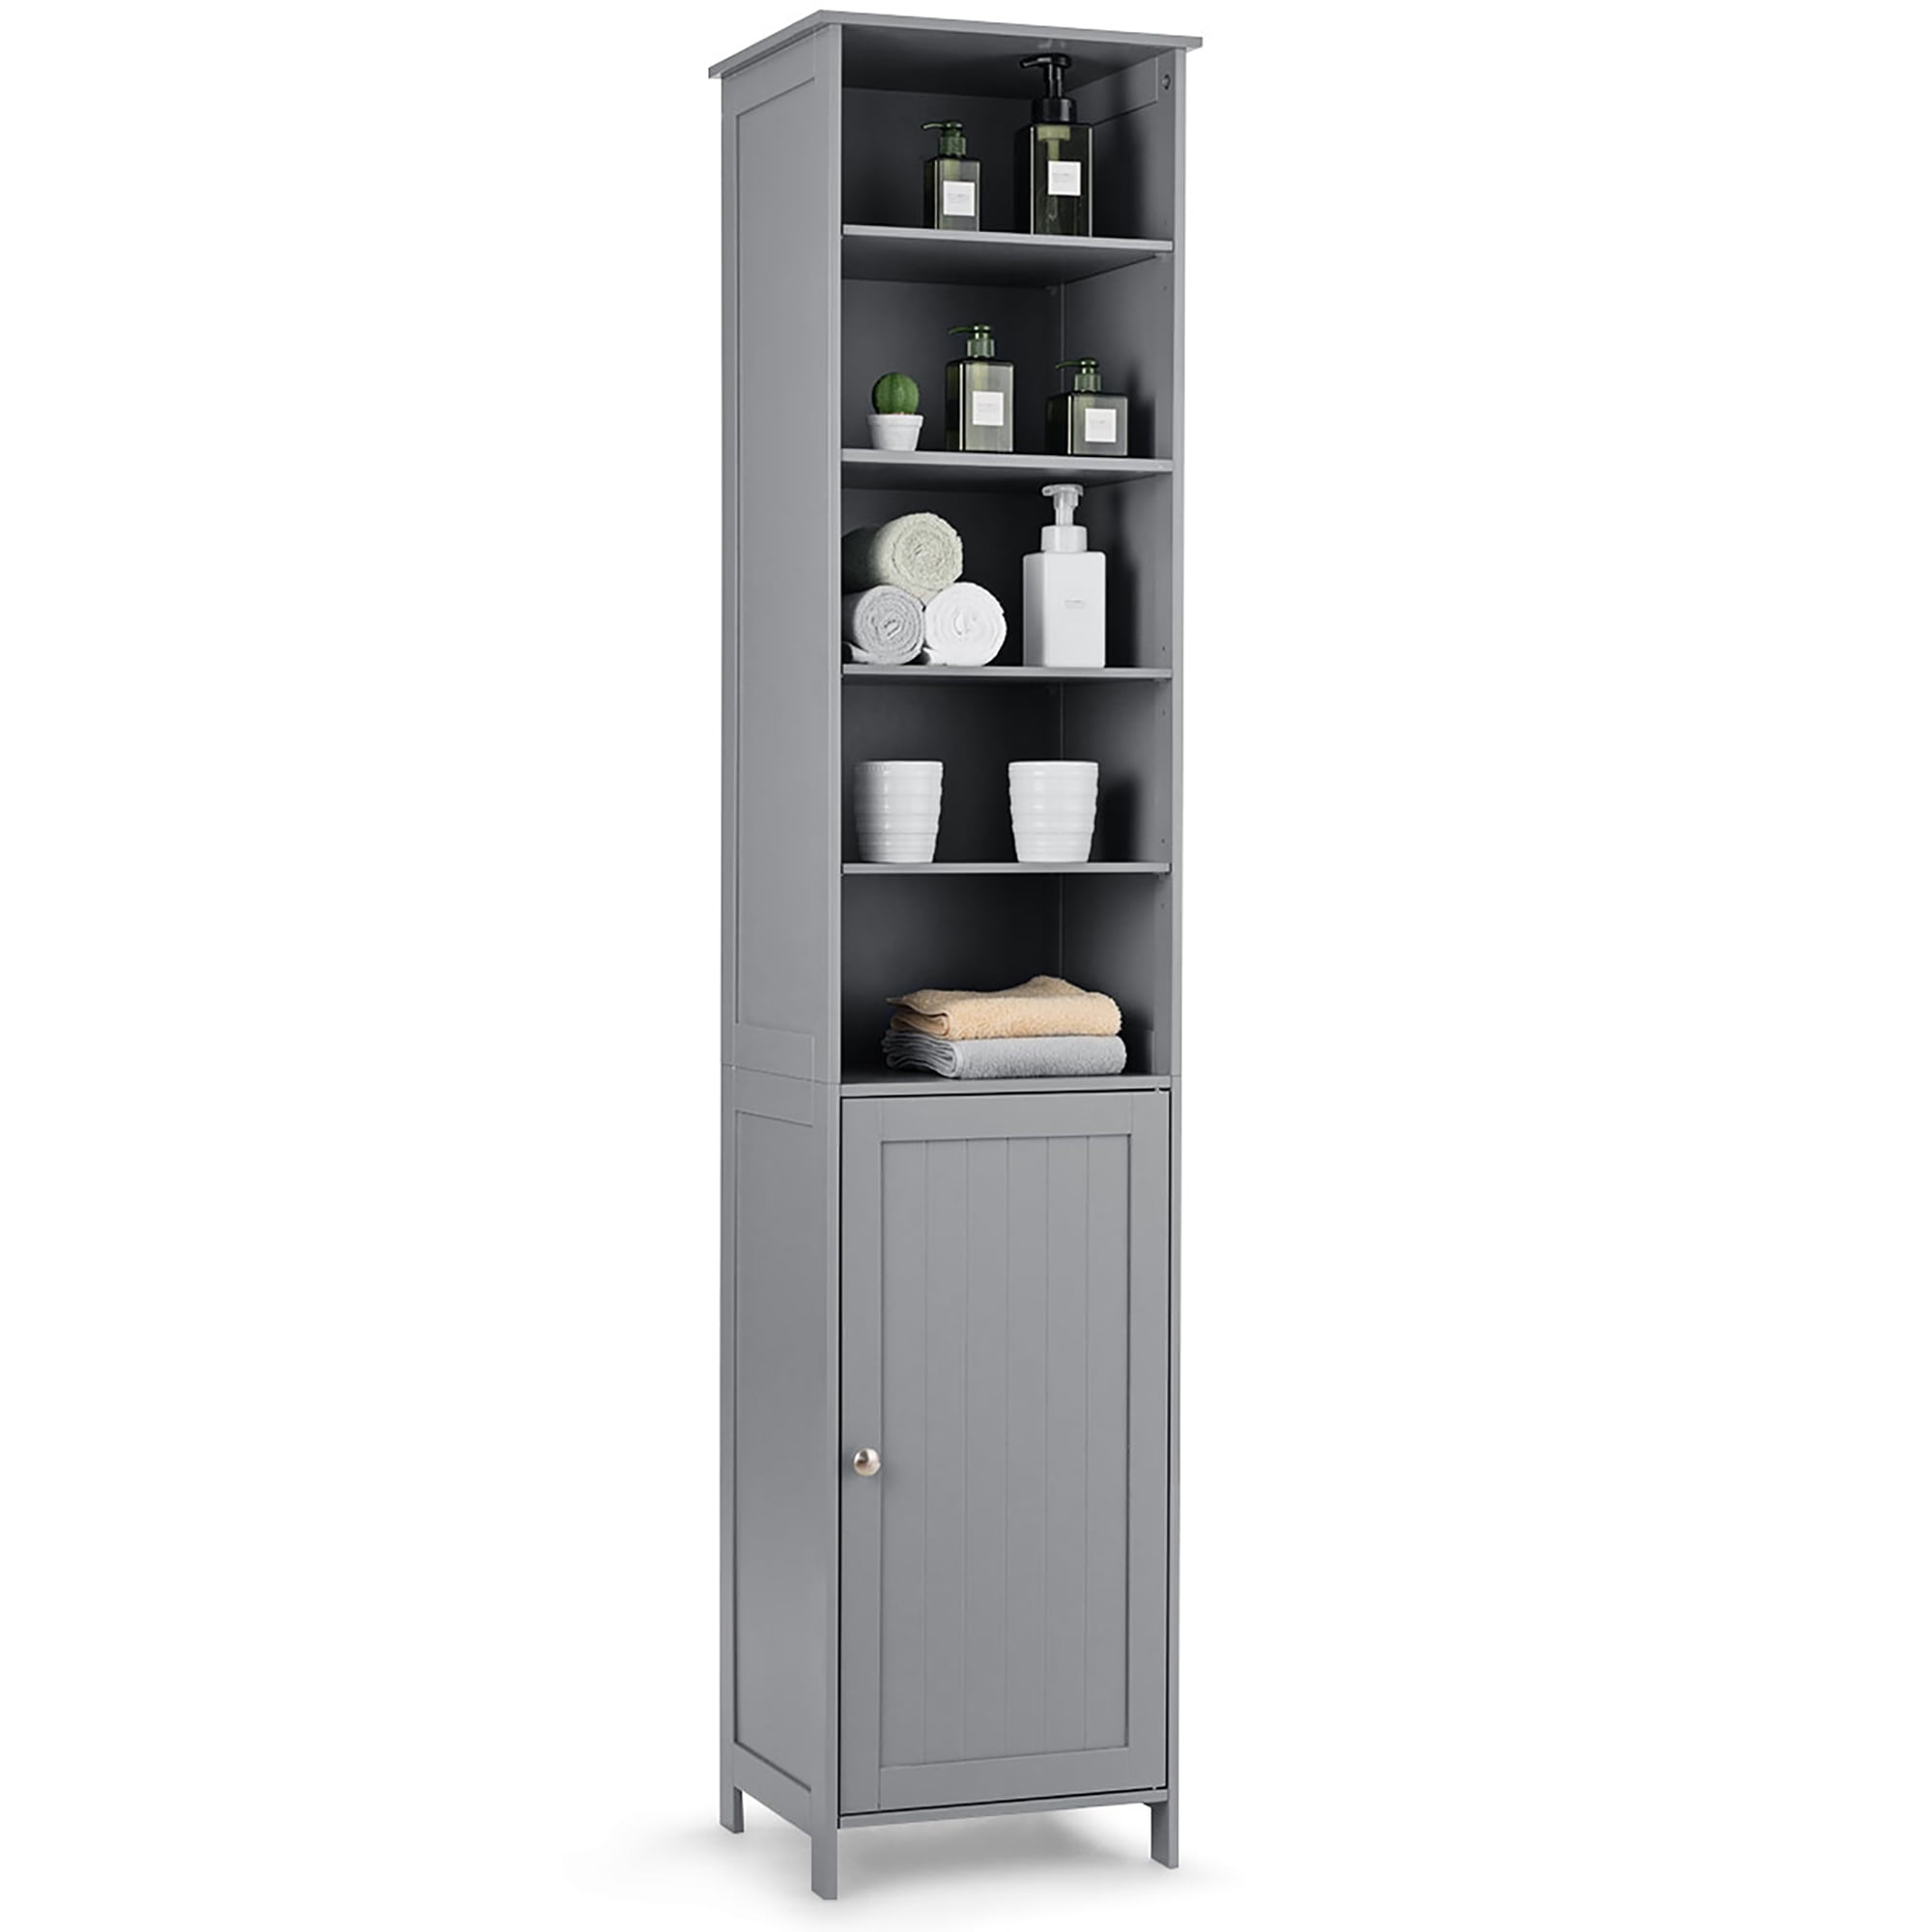 Simple Storage Cabinets With Shelves Walmart for Simple Design